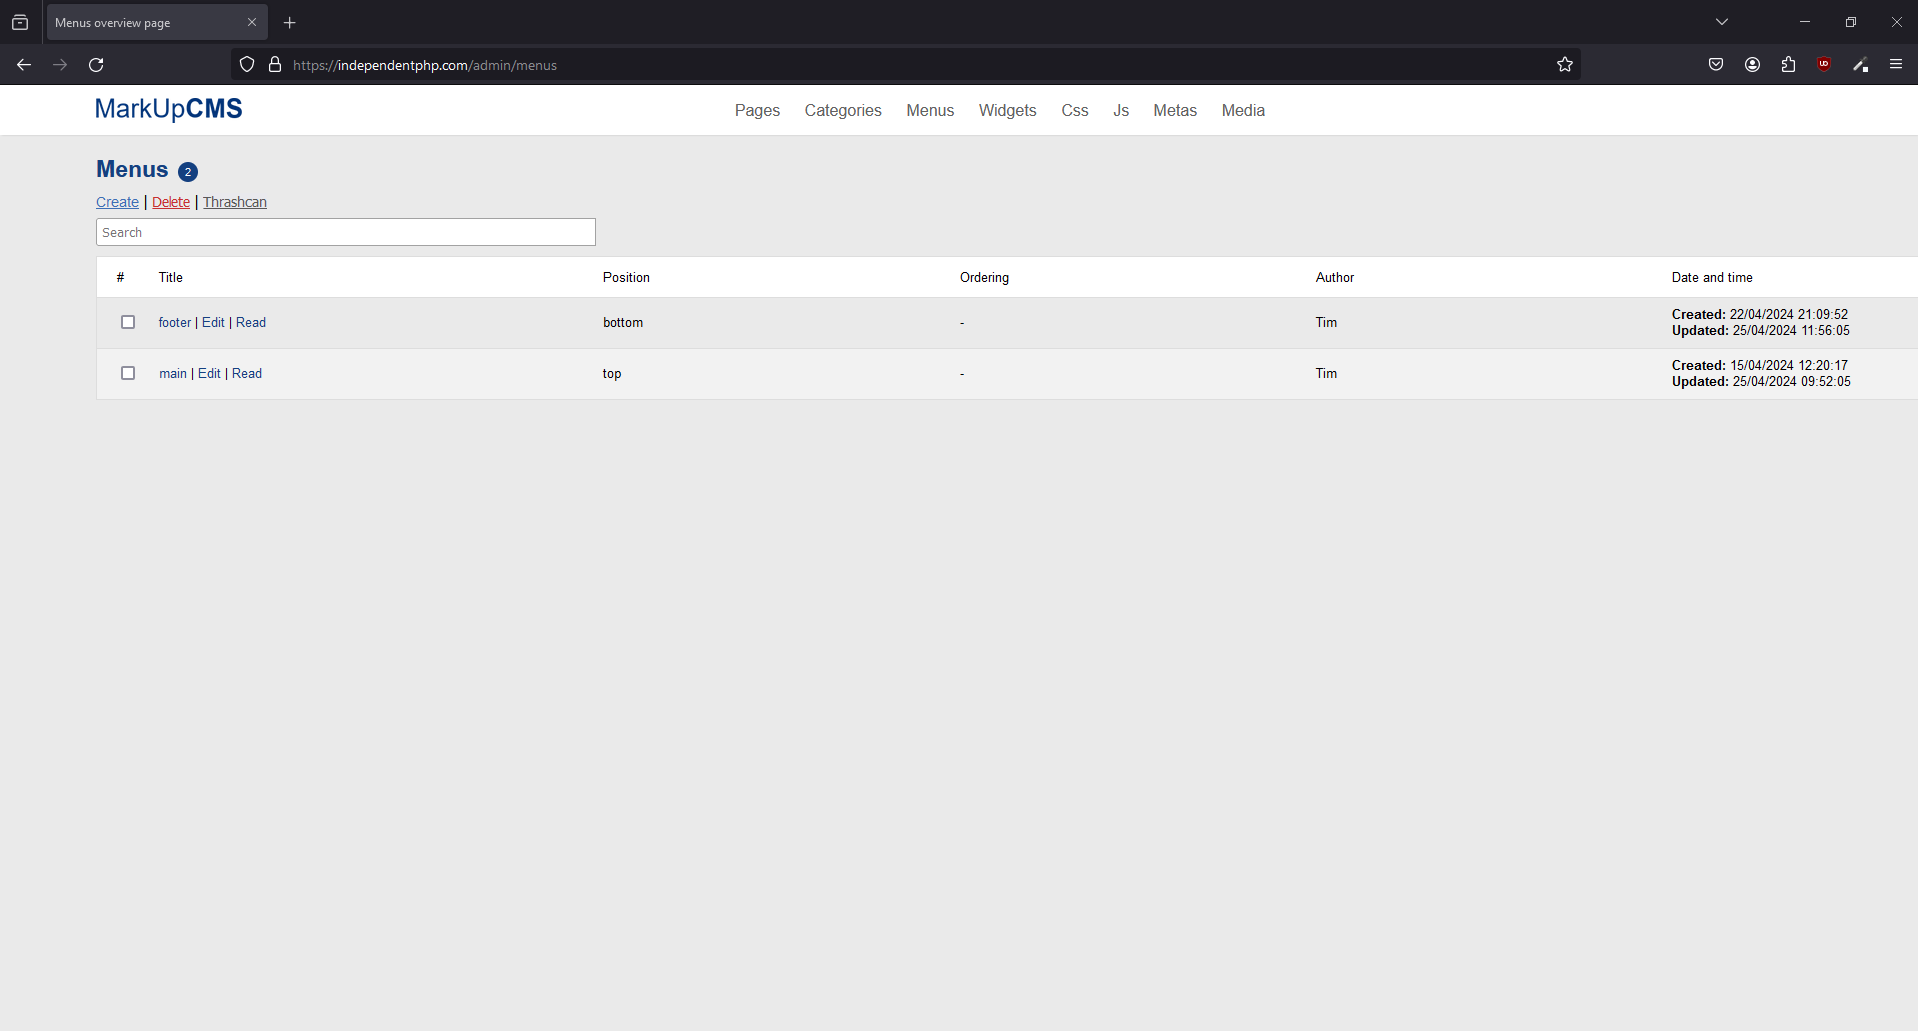 A screenshot of the menus index page in MarkUpCMS